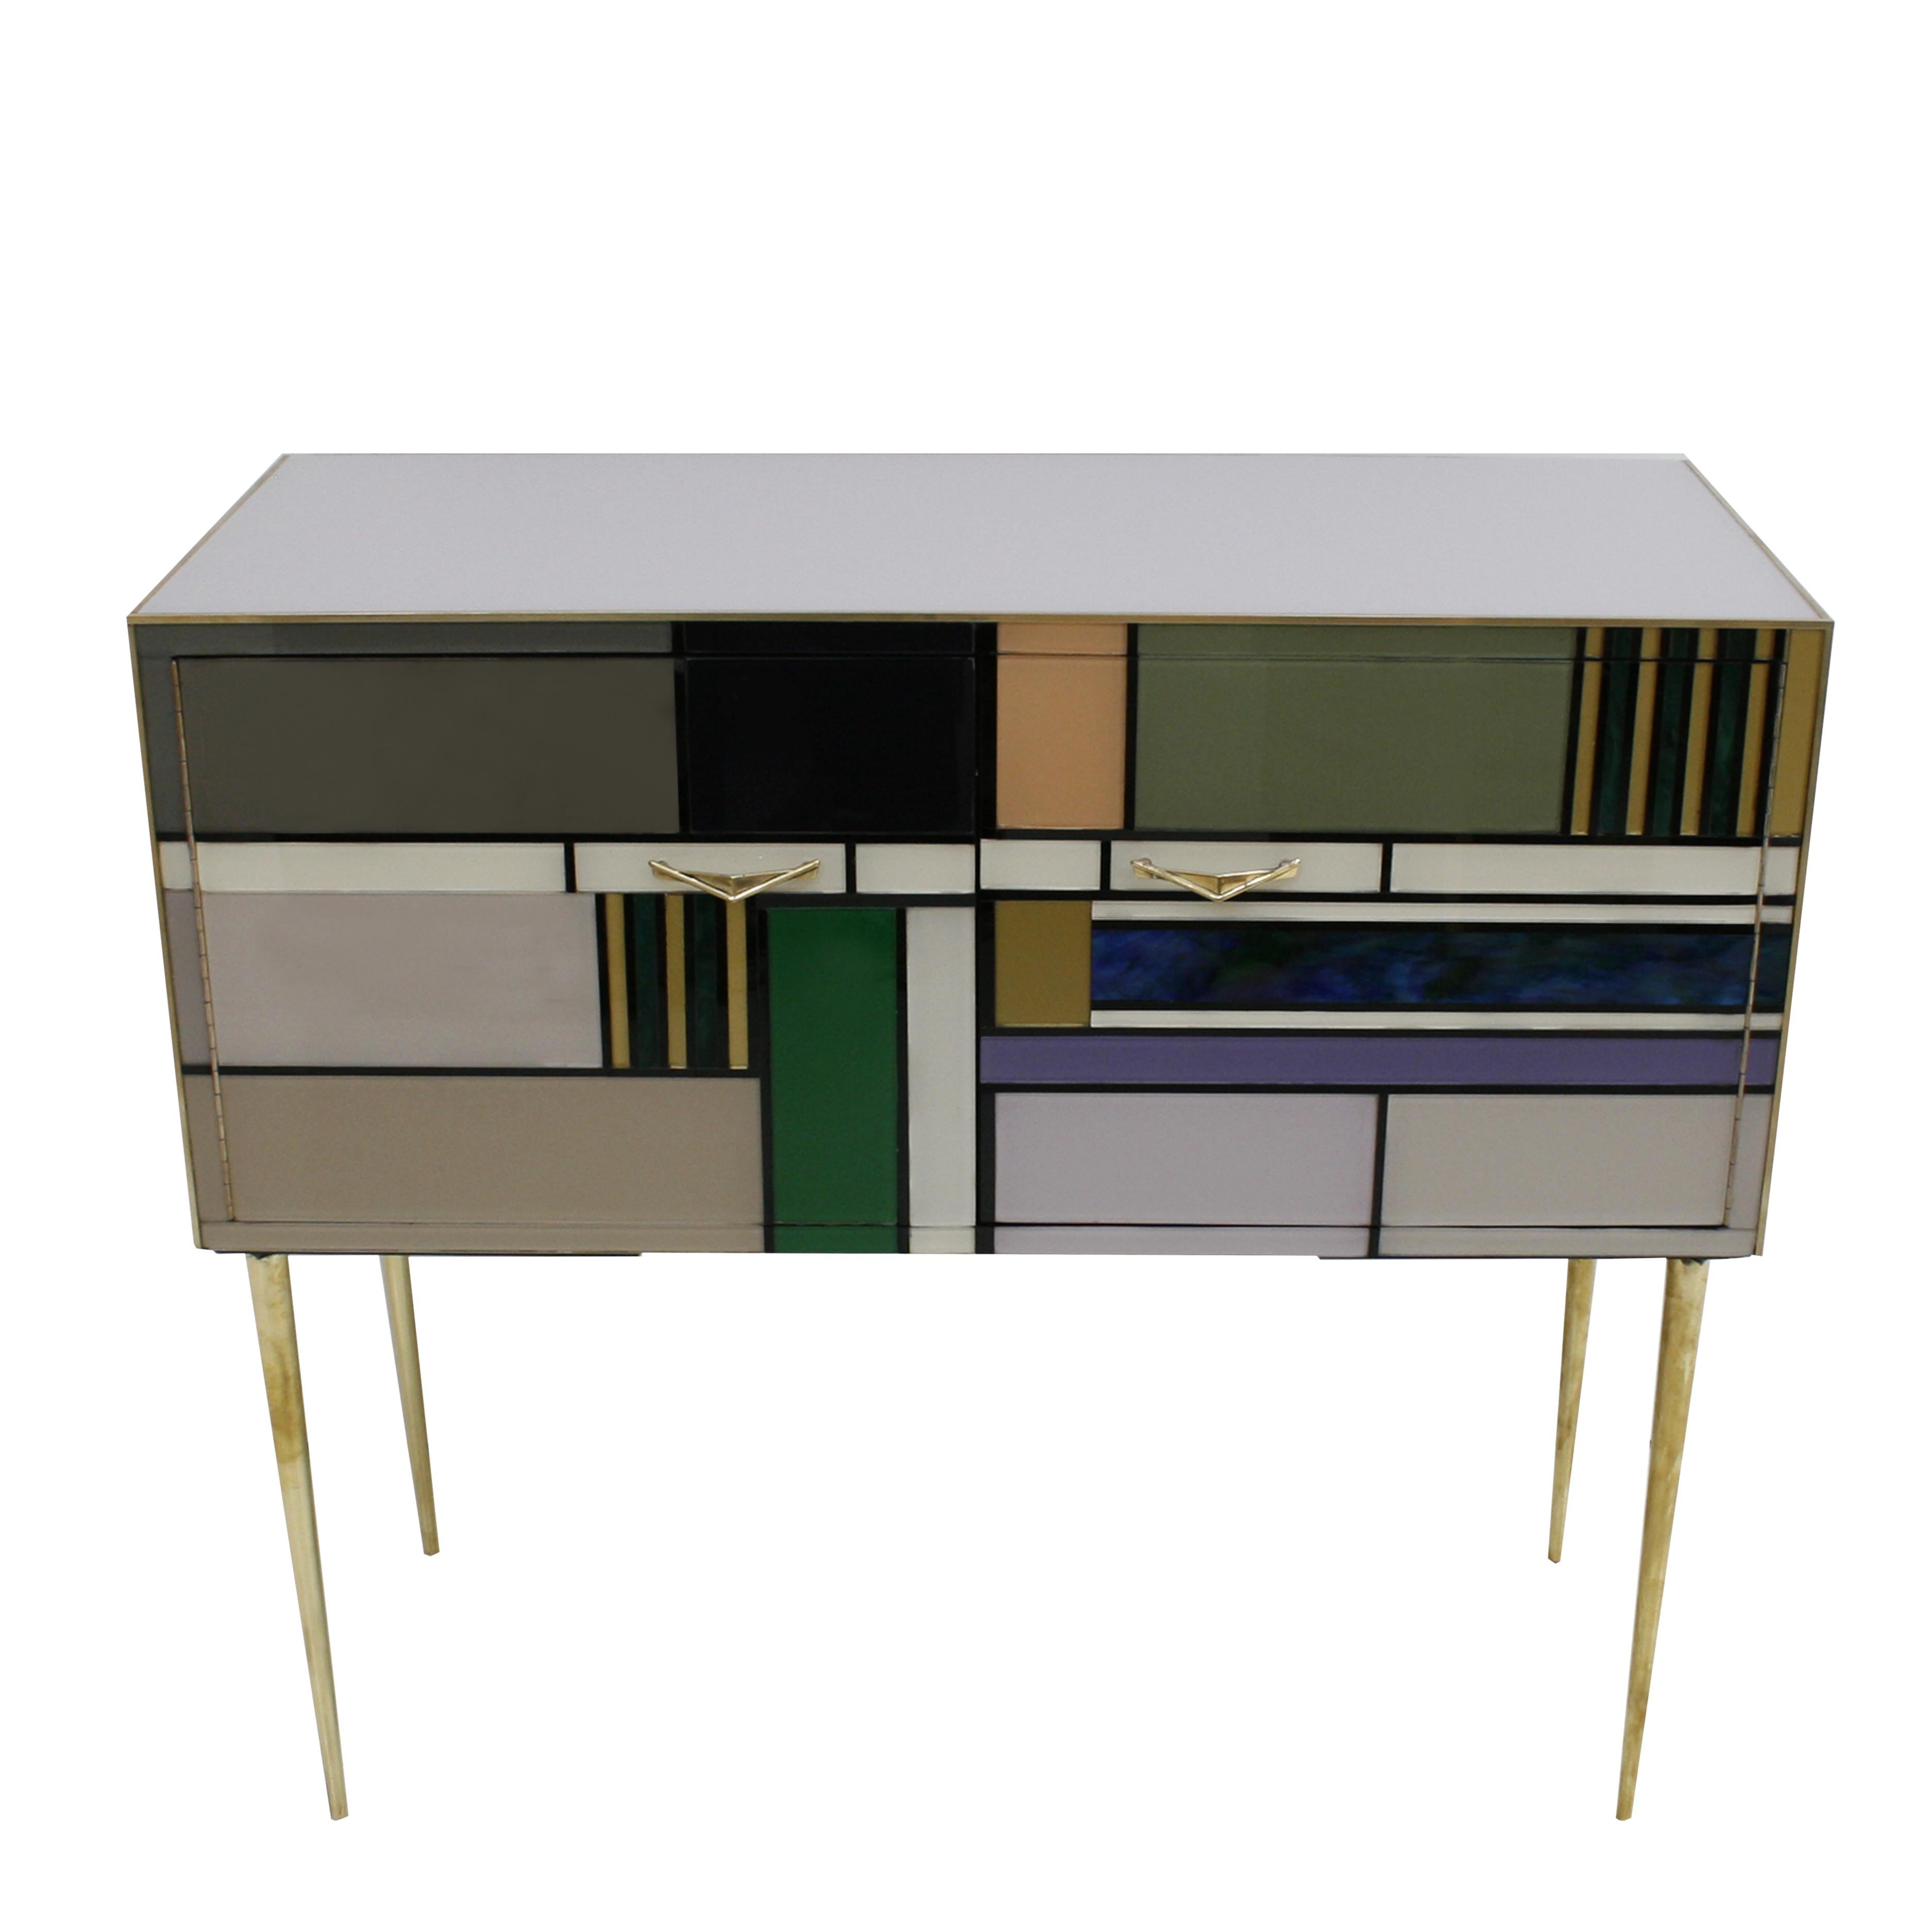 Pair of Italian sideboards with two doors, made in wooden structure covered in colored glass and profiles, handles and brass feet.